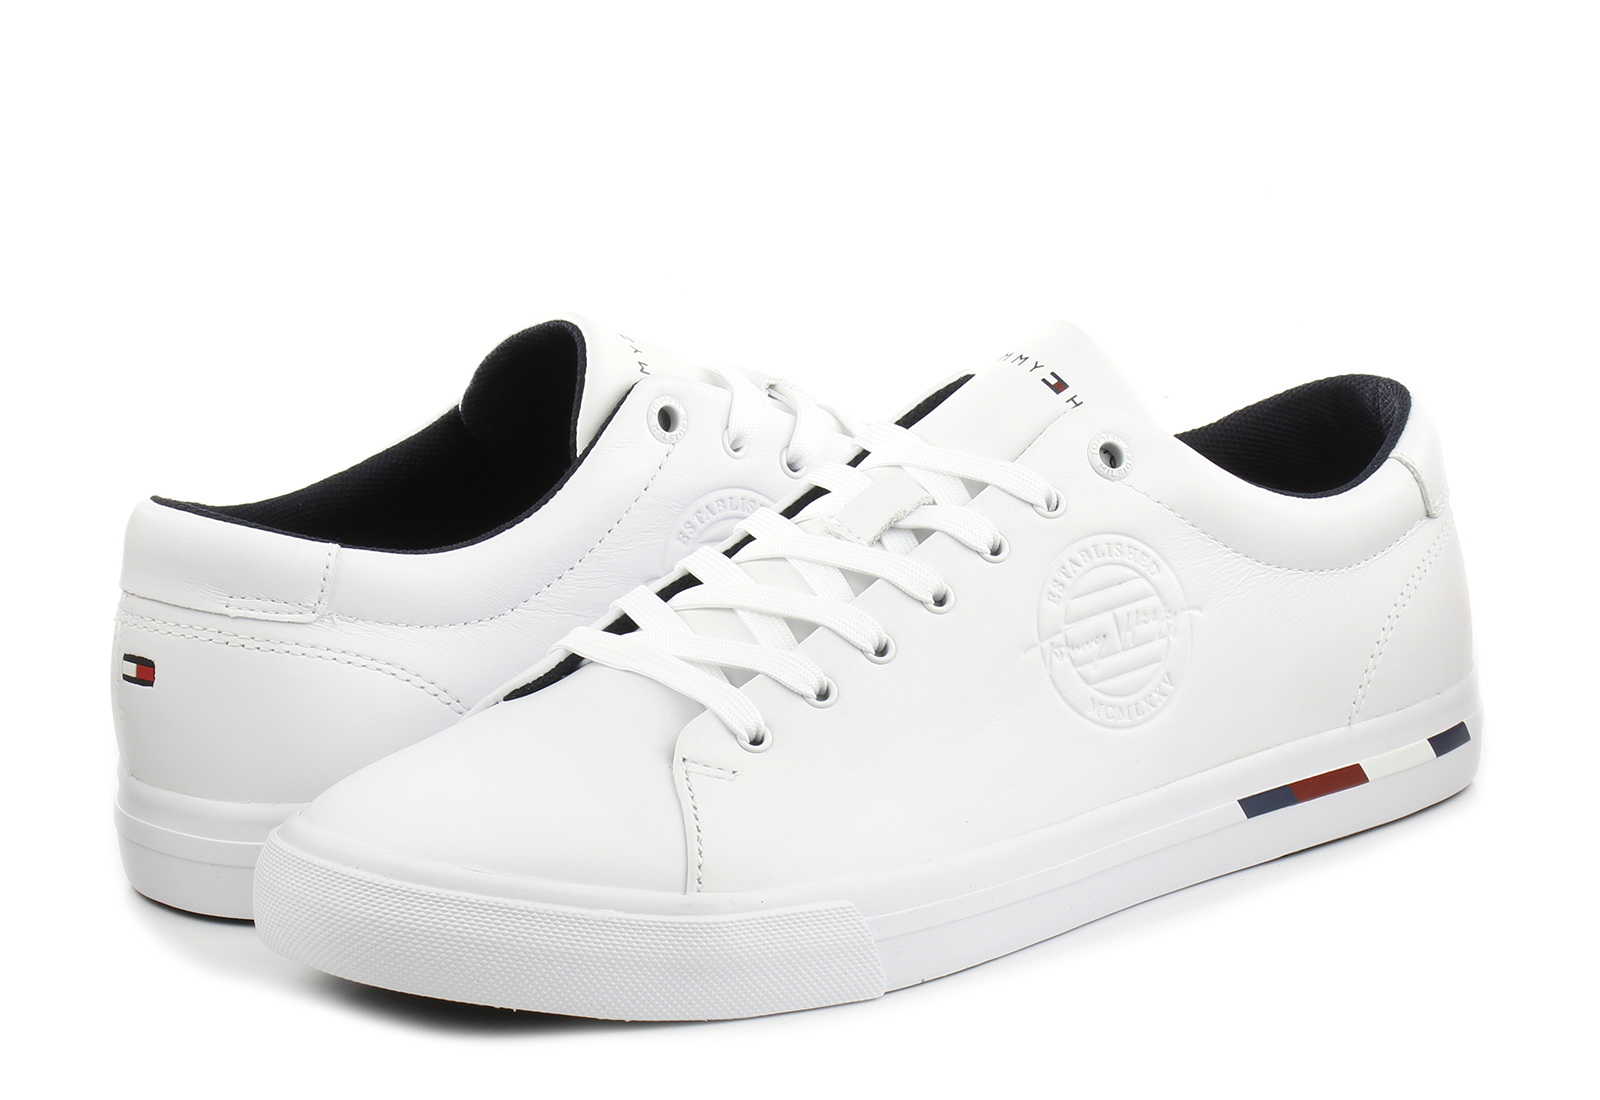 Impressionism Italian sour Tommy Hilfiger Sneakers - Dino 25a - FM0-4076-YBR - Office Shoes Romania